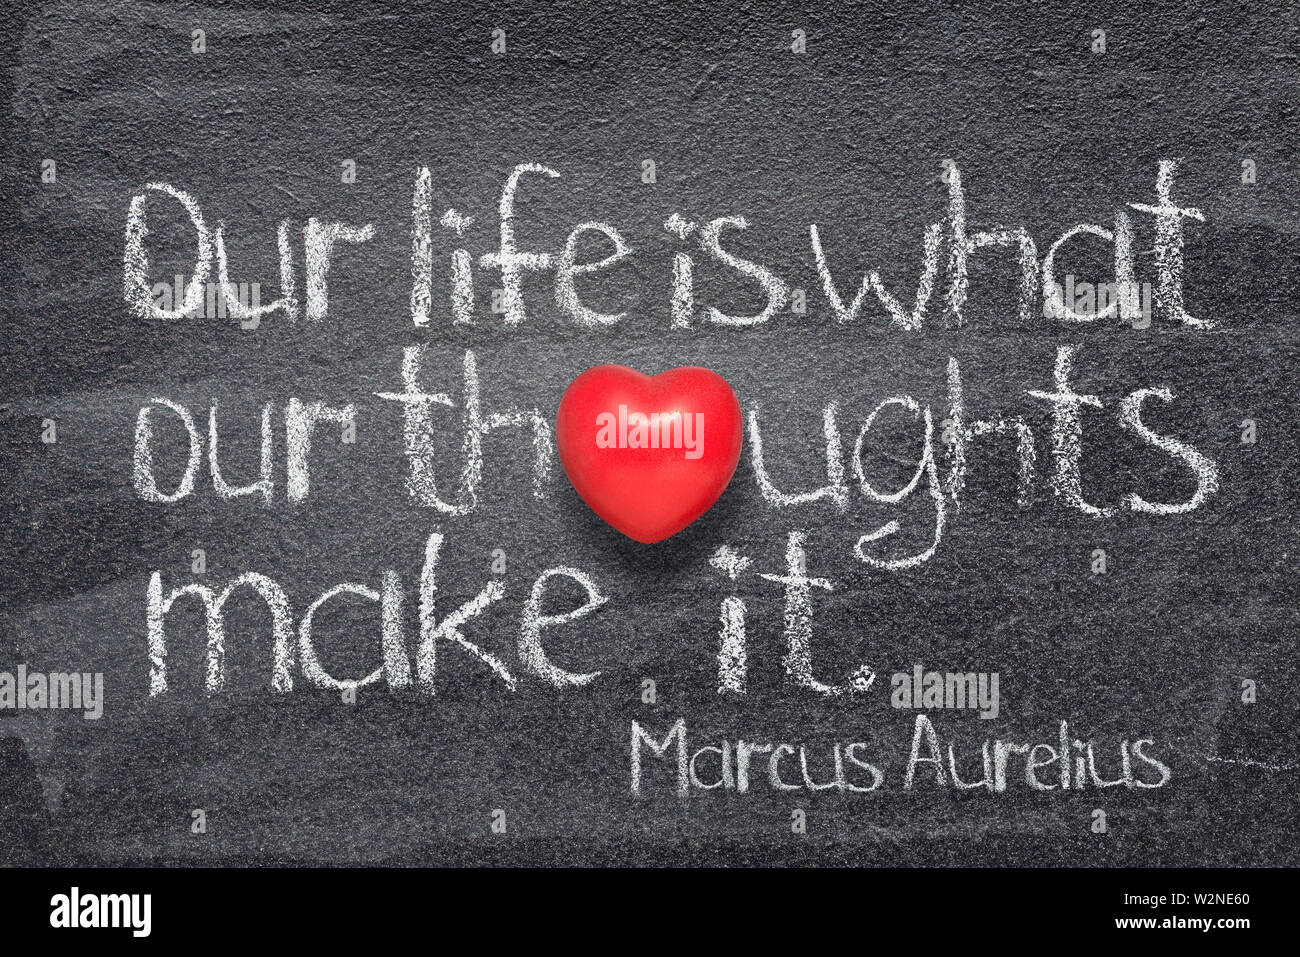 Our life is what our thoughts make it - ancient Roman philosopher Marcus Aurelius concept quote written on chalkboard Stock Photo